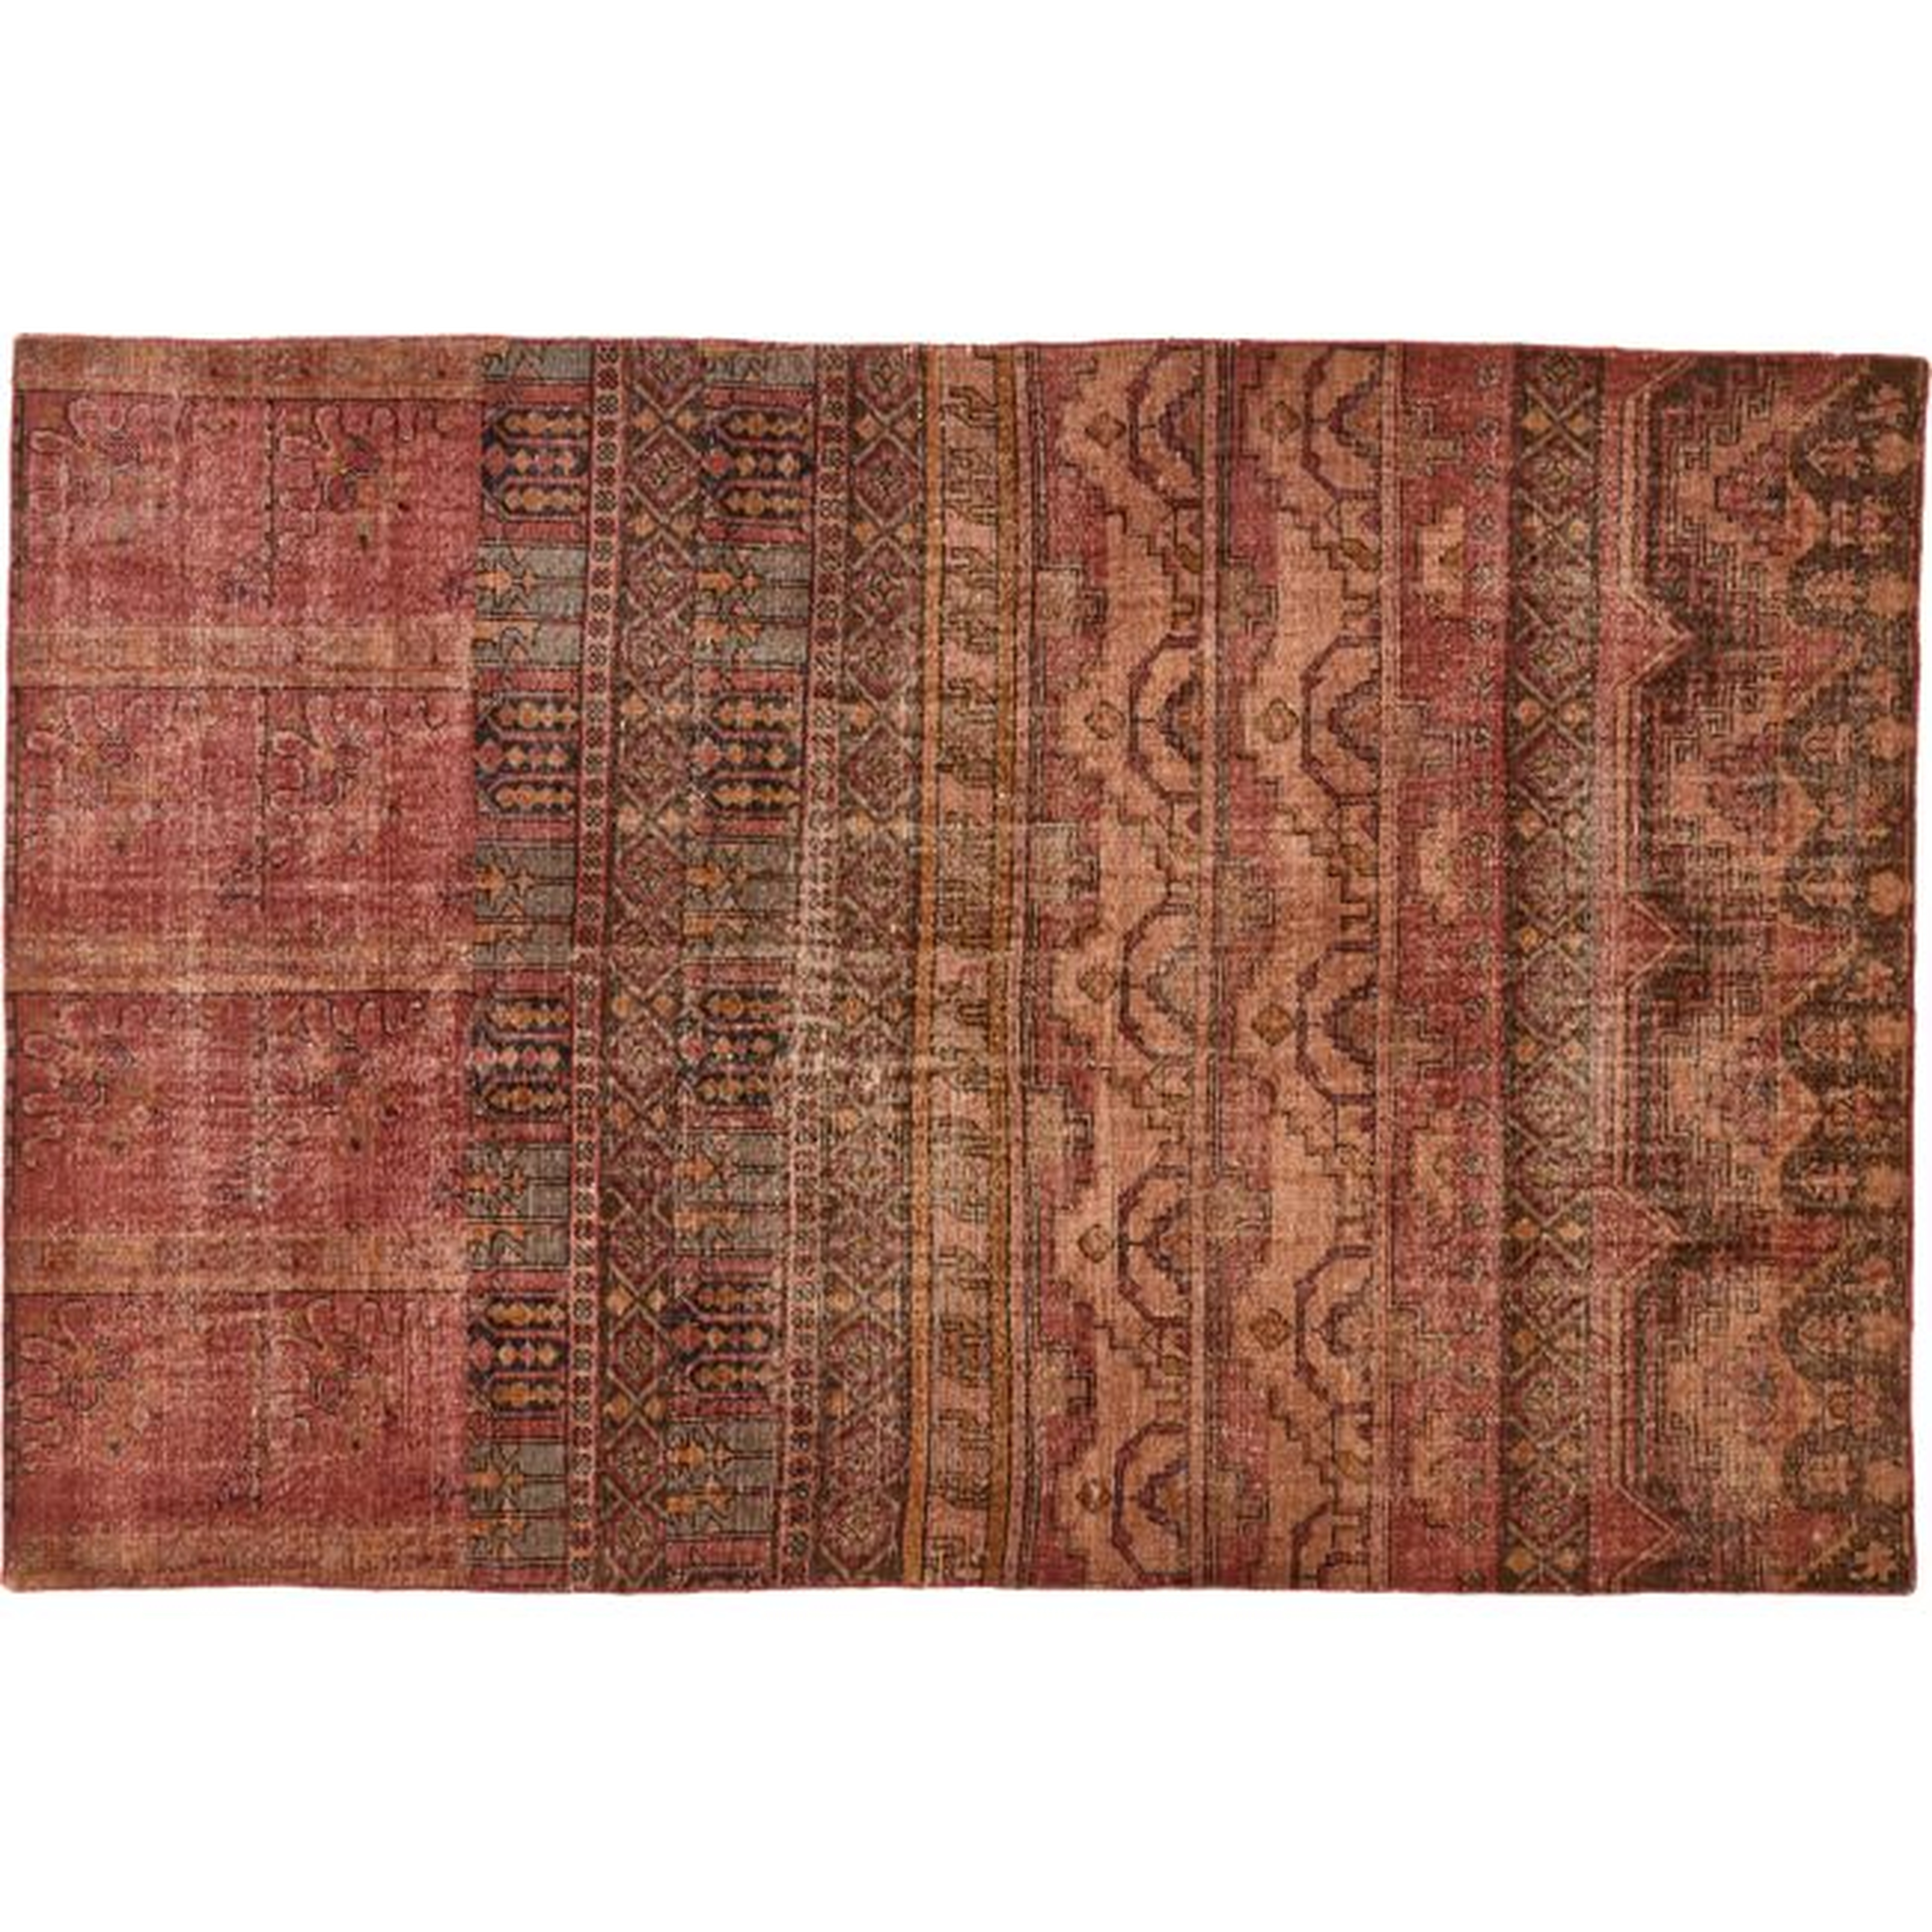 Rubie Hand-Knotted Area Rug 6"x9" - CB2